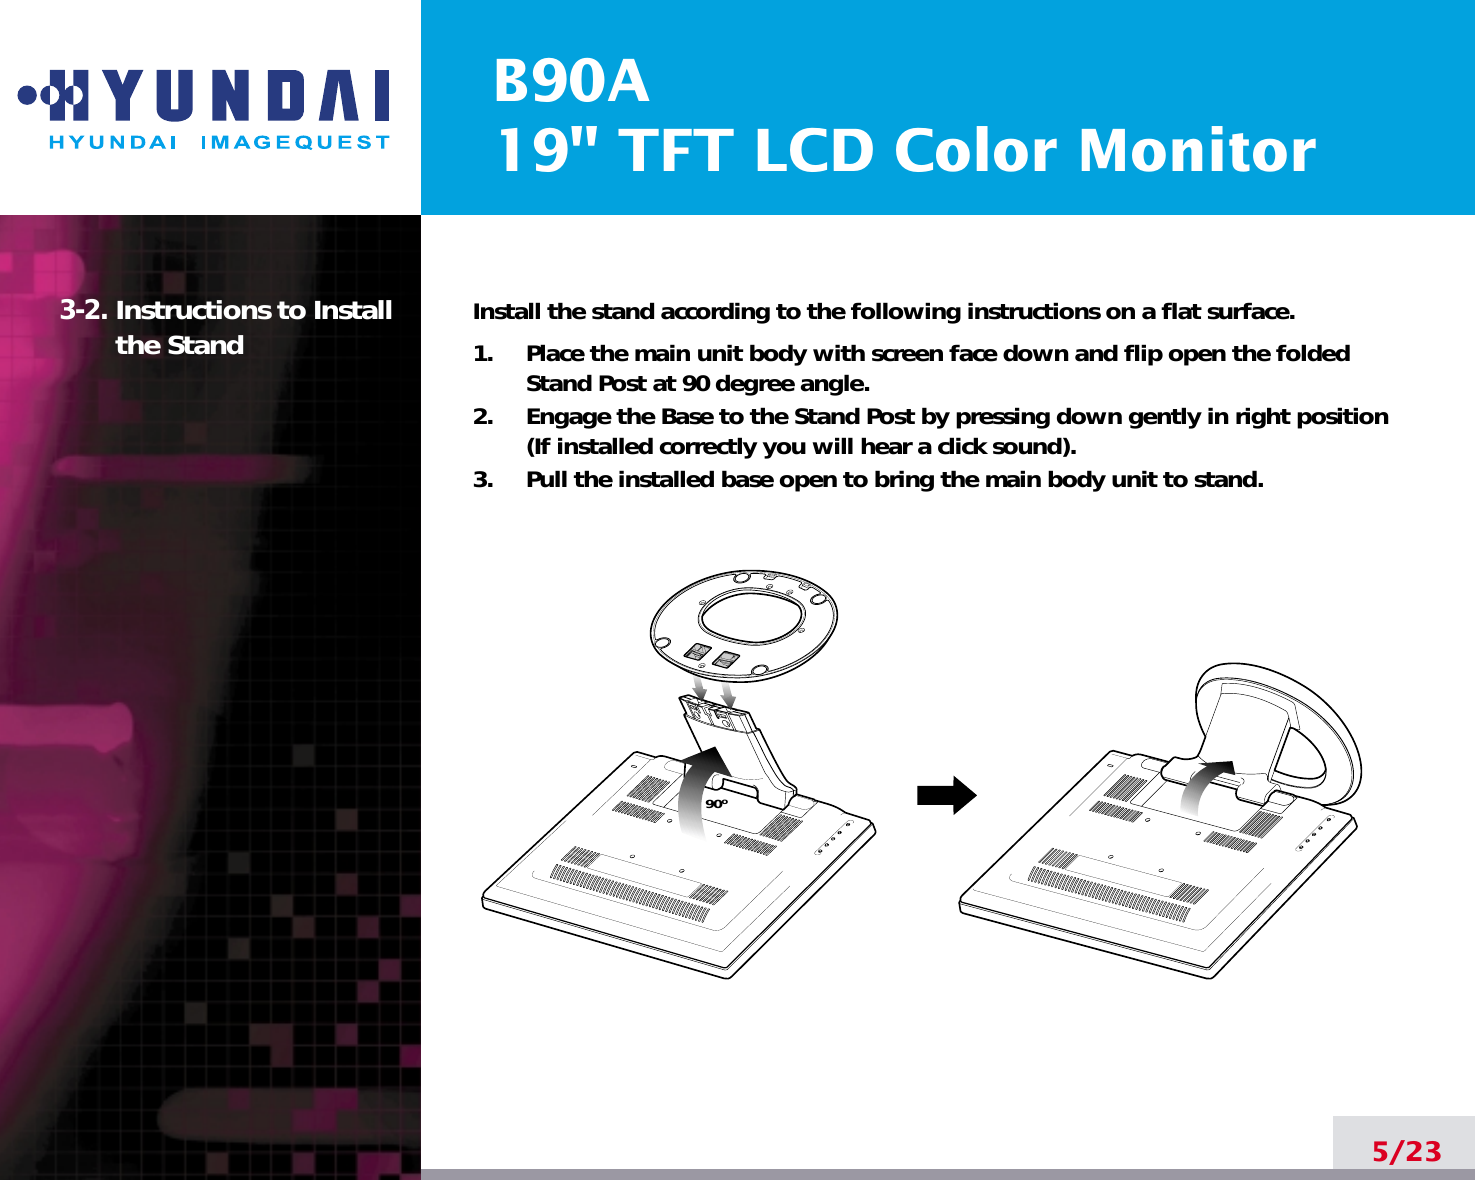 B90A19&quot; TFT LCD Color Monitor3-2. Instructions to Installthe Stand Install the stand according to the following instructions on a flat surface.1.     Place the main unit body with screen face down and flip open the foldedStand Post at 90 degree angle.2.     Engage the Base to the Stand Post by pressing down gently in right position(If installed correctly you will hear a click sound).3.     Pull the installed base open to bring the main body unit to stand.5/2390o